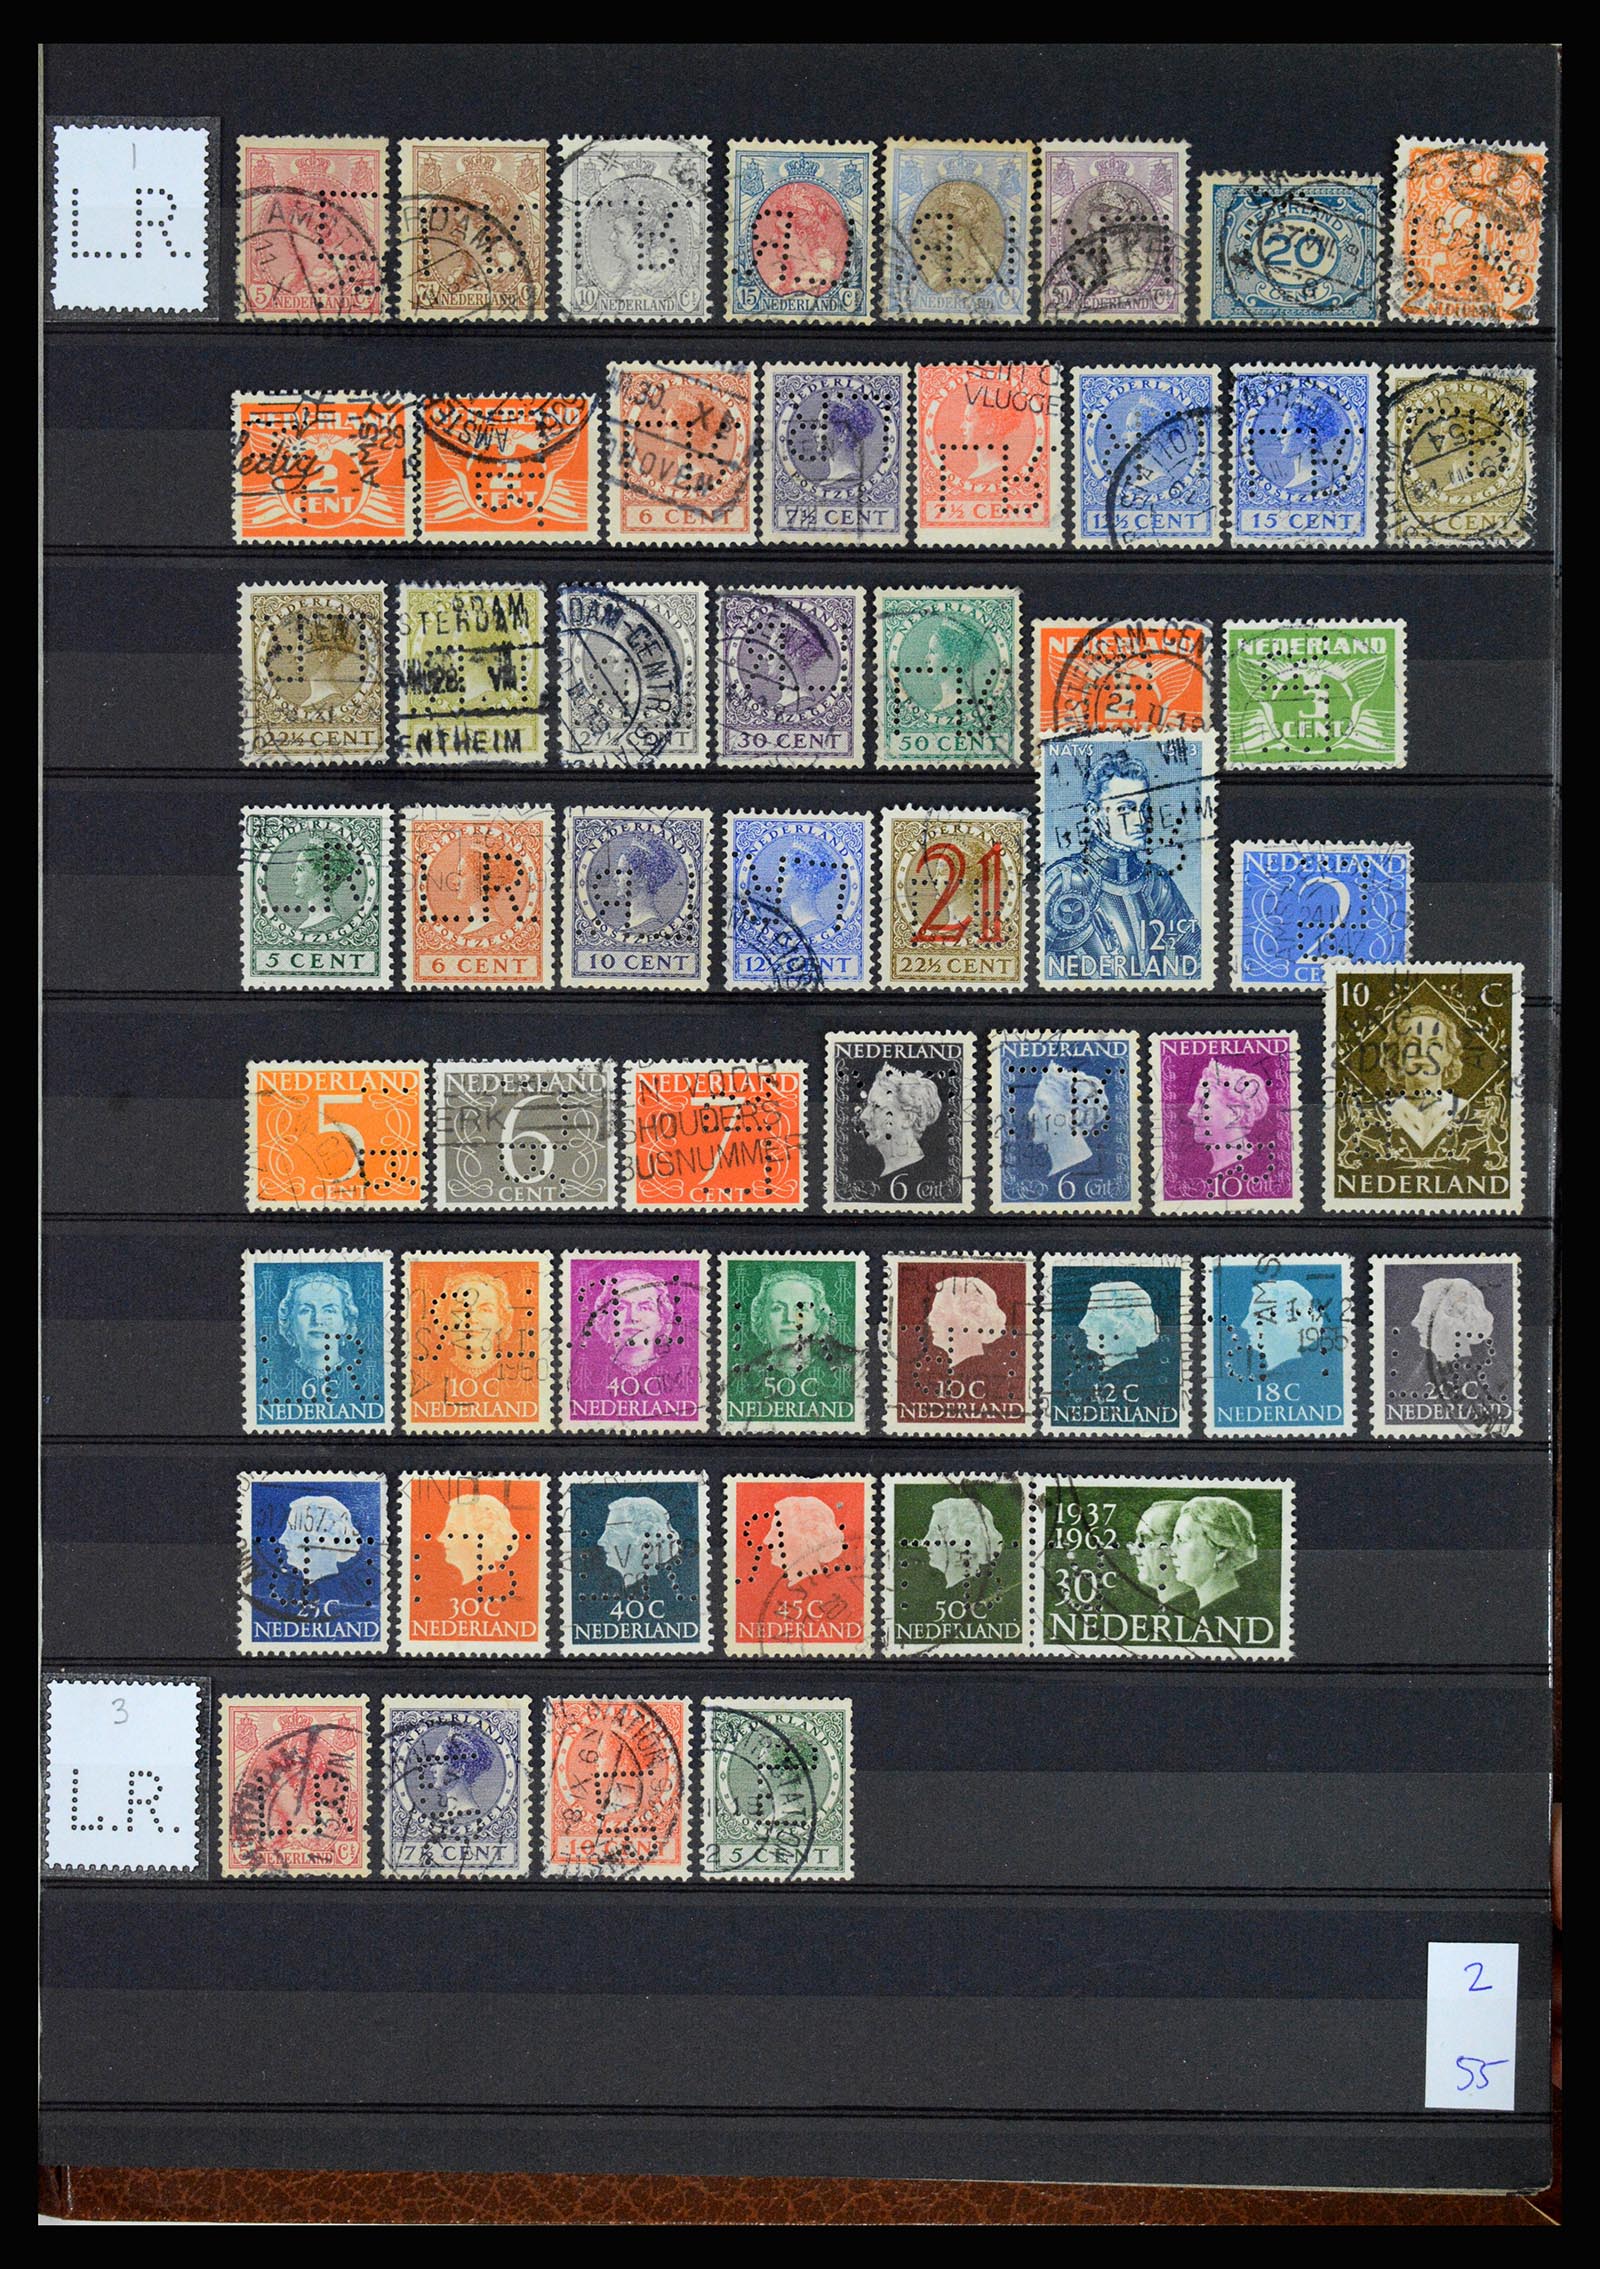 37183 030 - Stamp collection 37183 Netherlands perfins 1872-1960.